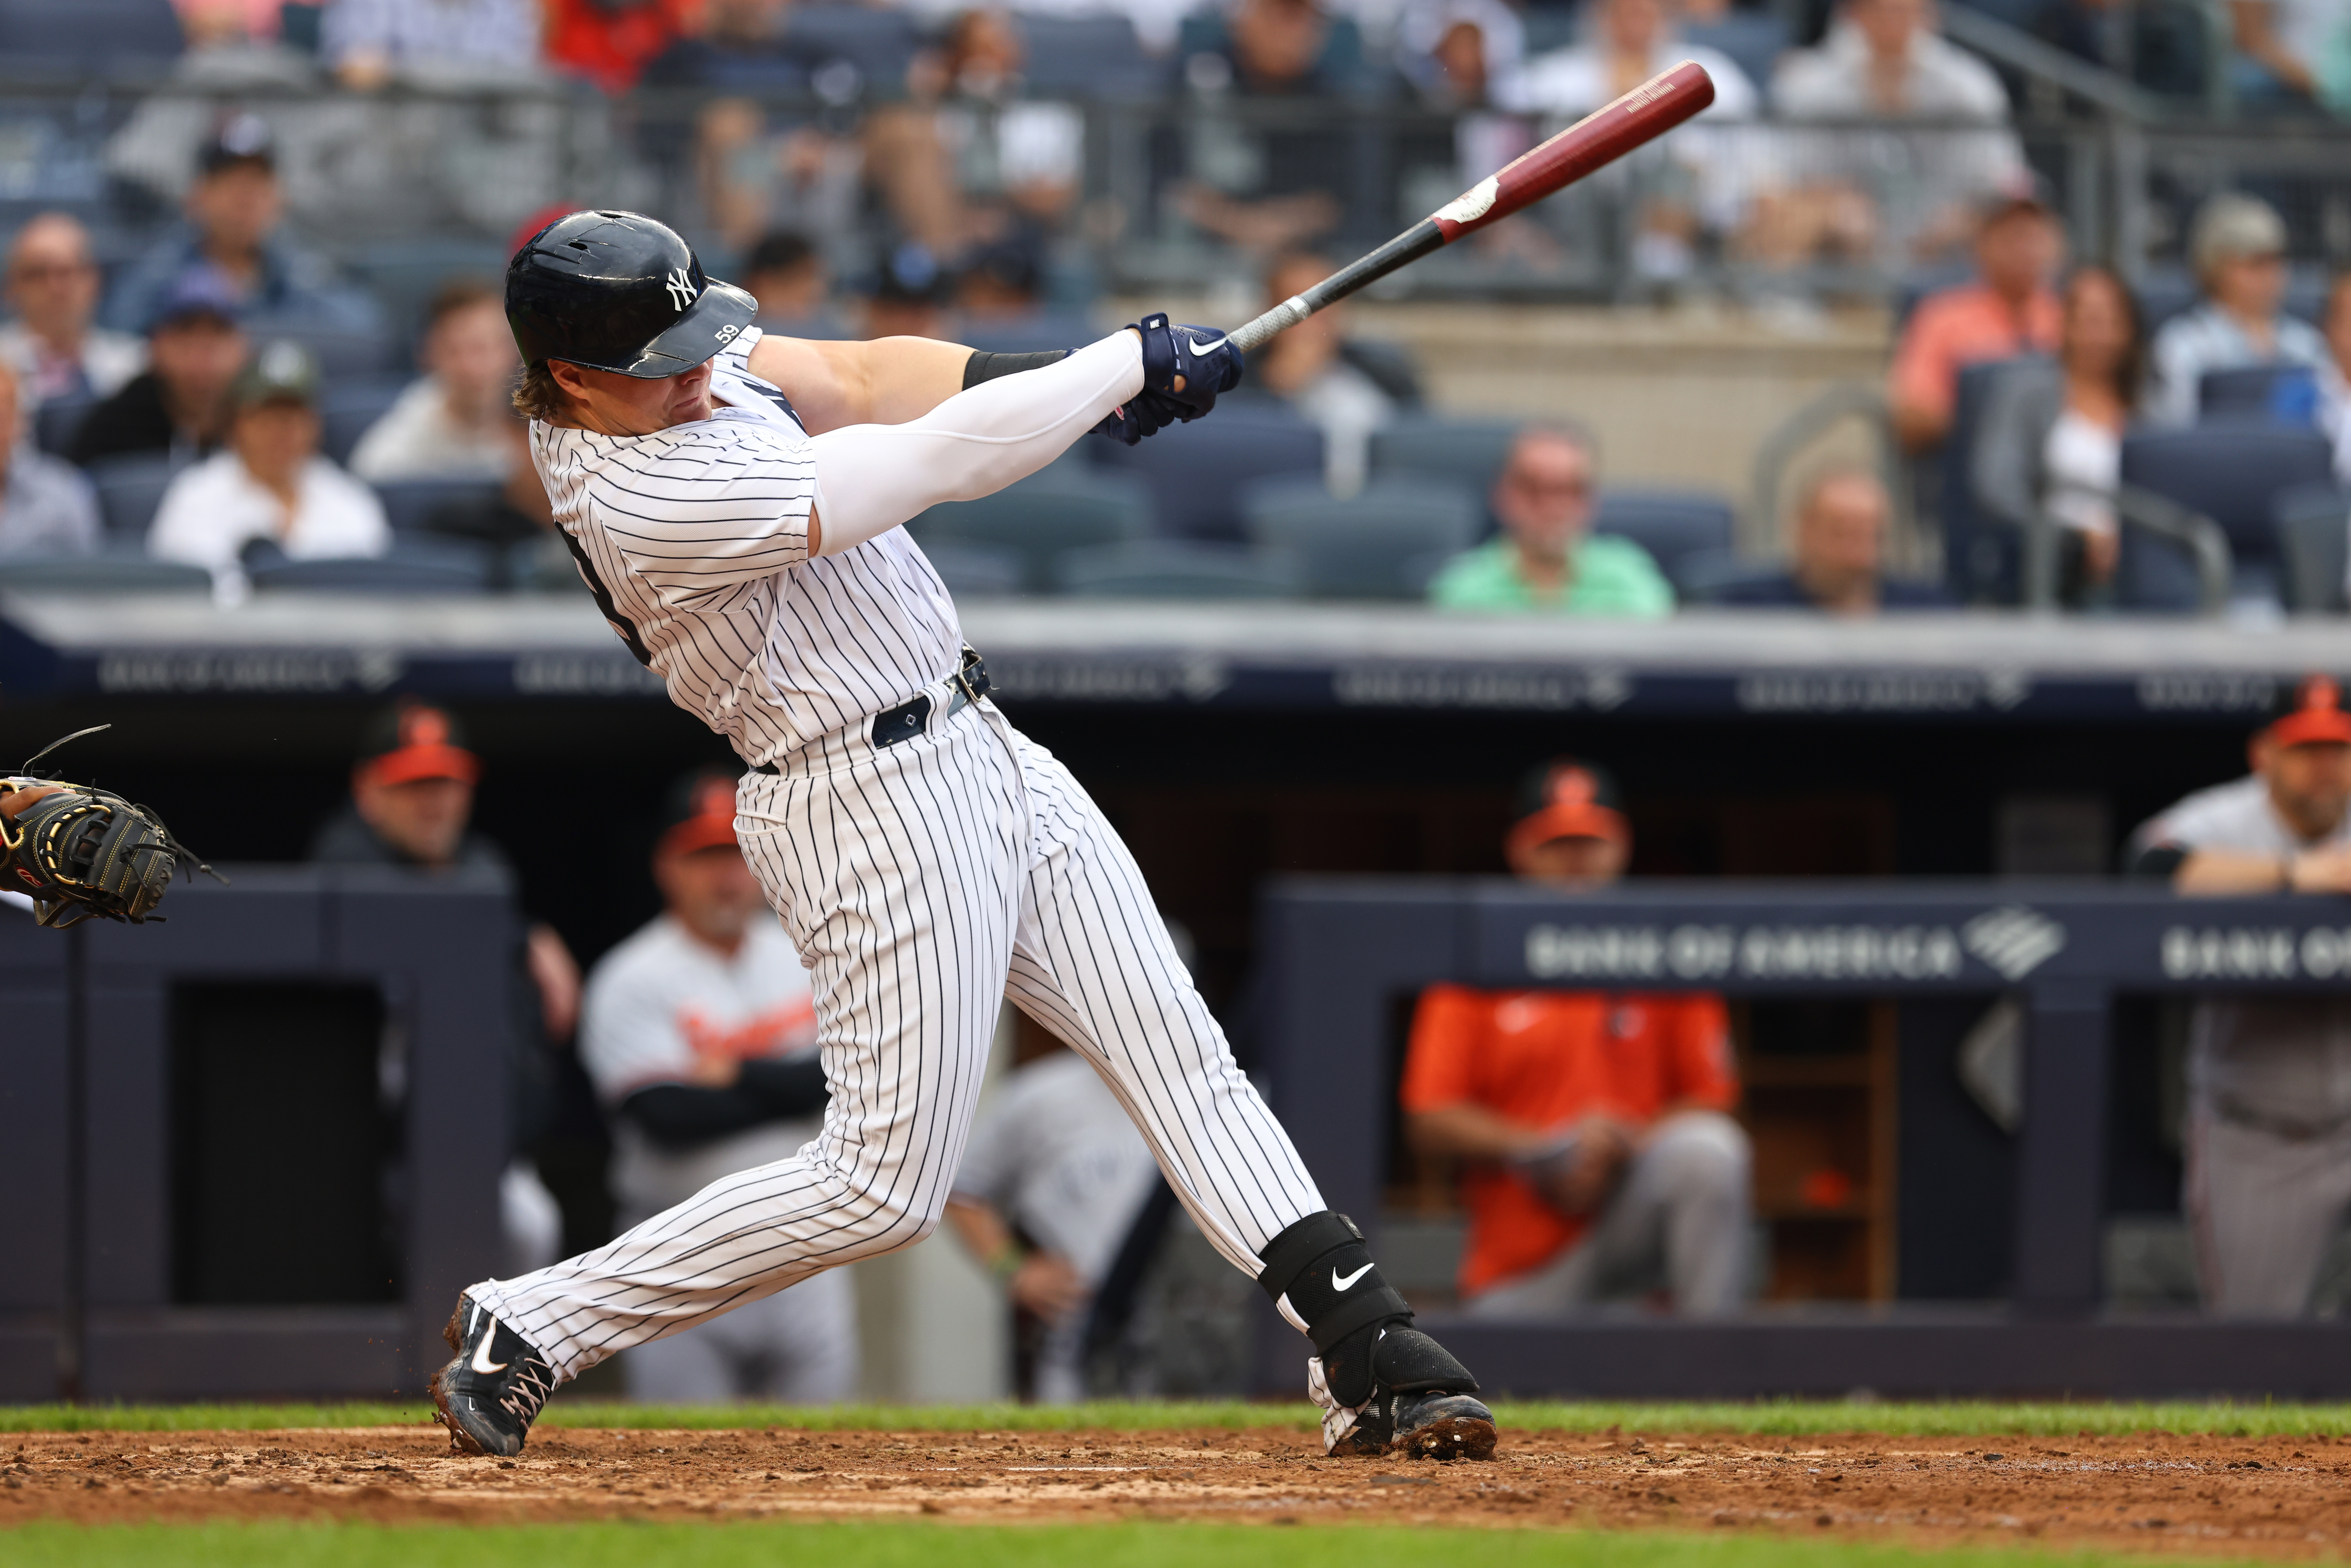 Padres acquire Luke Voit from Yankees, hoping he adds thump to